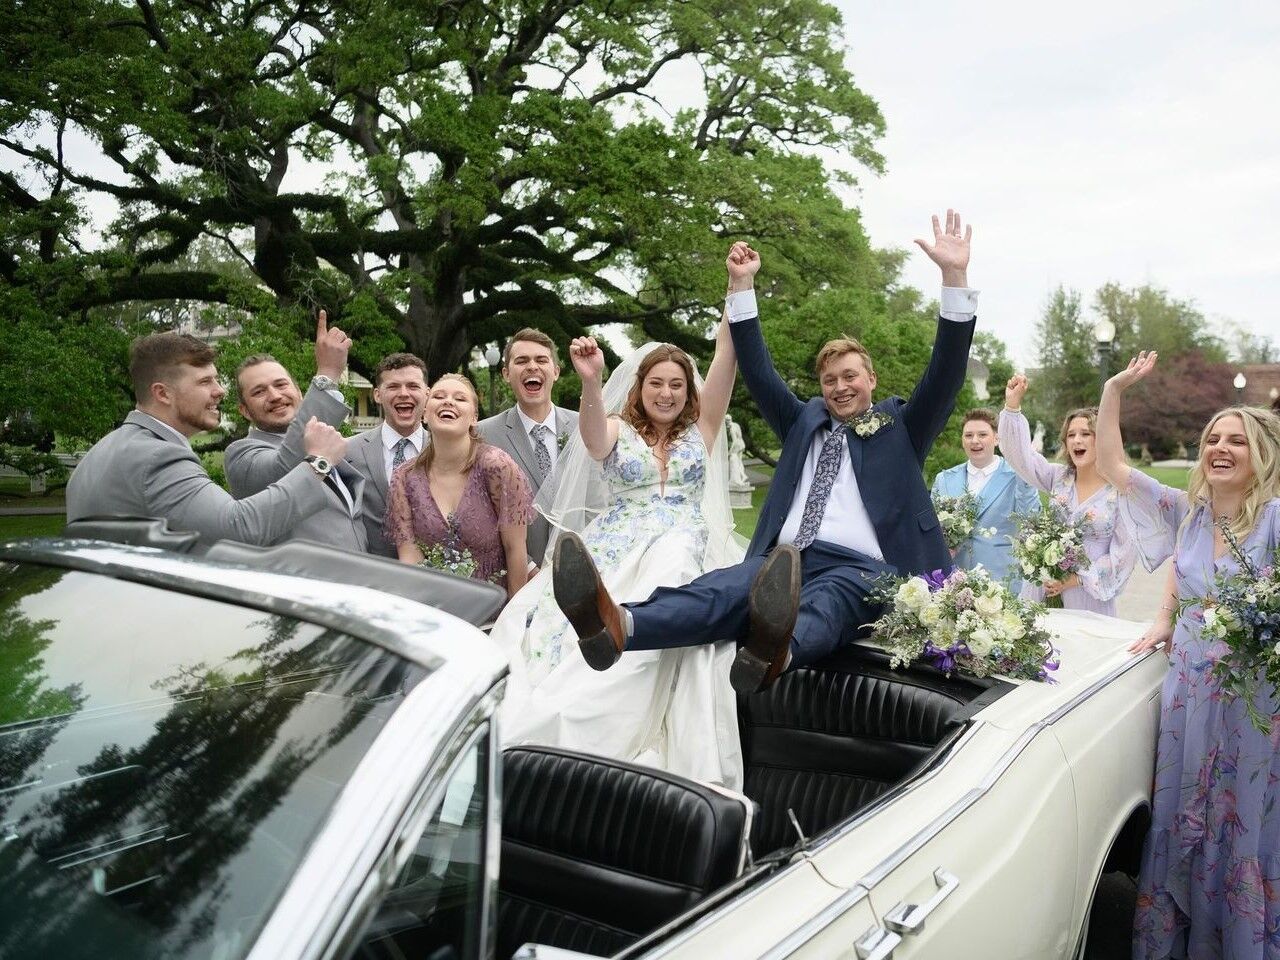 Happy couple celebrating in a convertable with wedding party